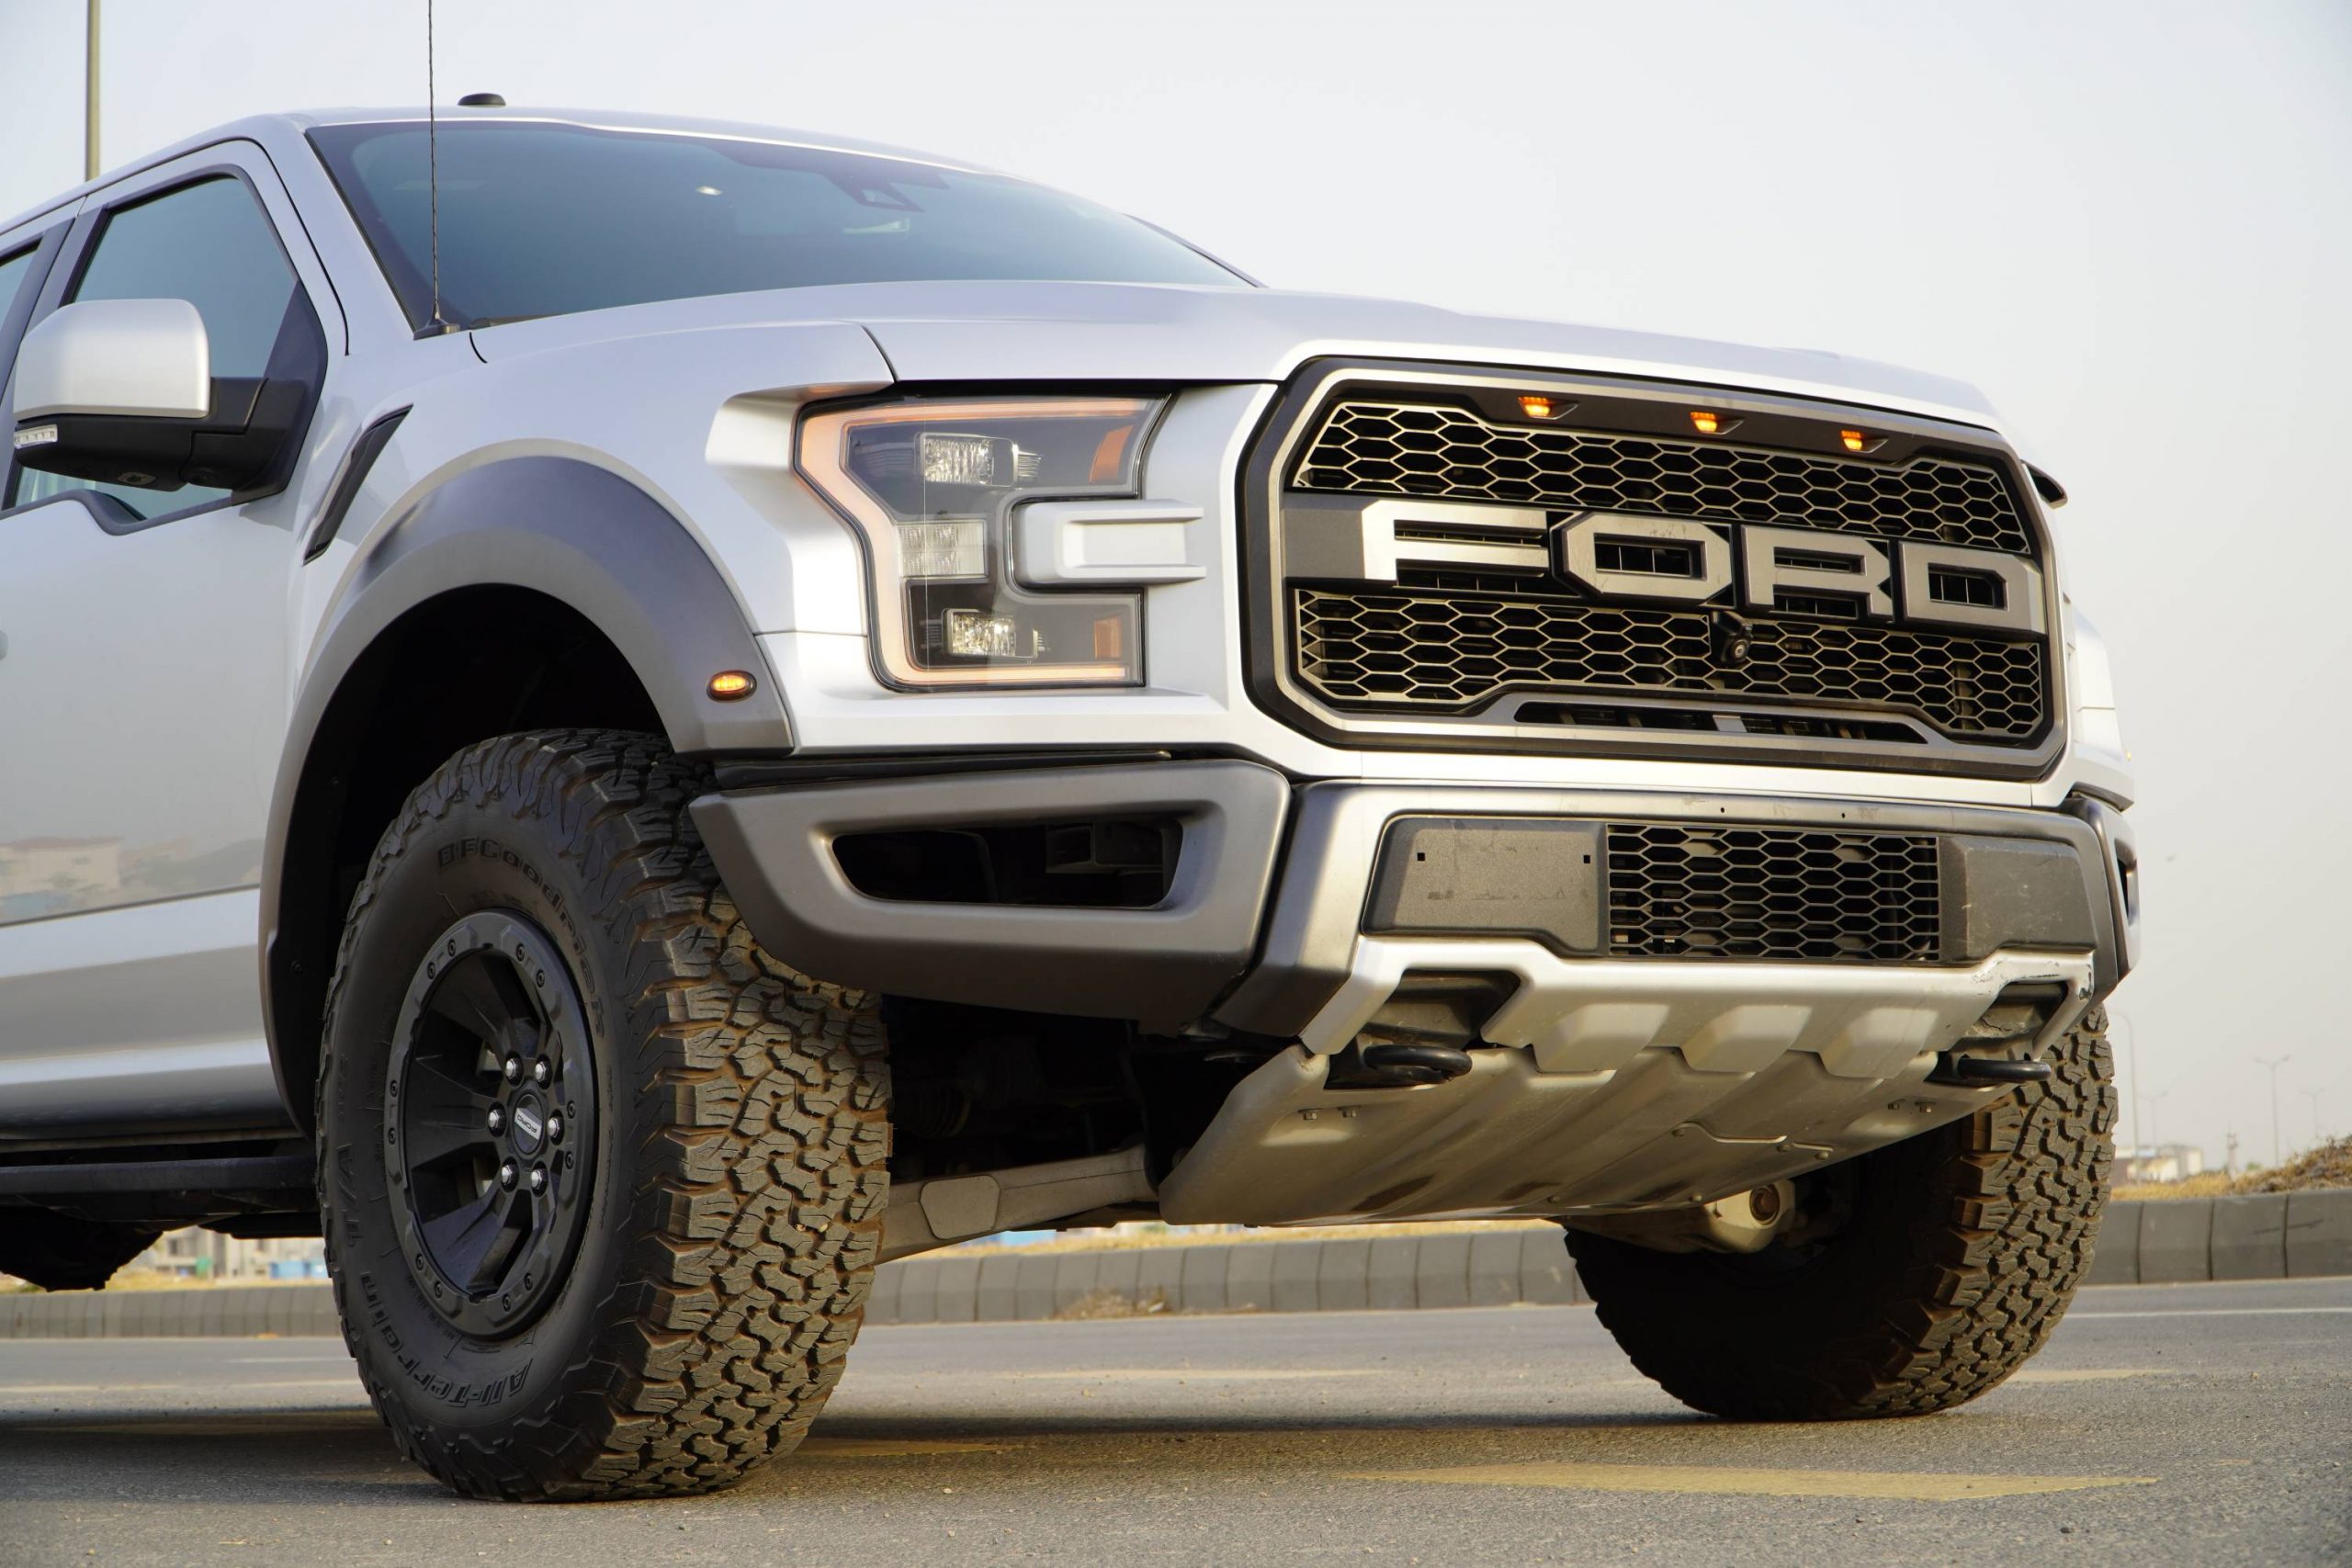 “Ford F150 Raptor is The King of Trucks” Owner Review PakWheels Blog